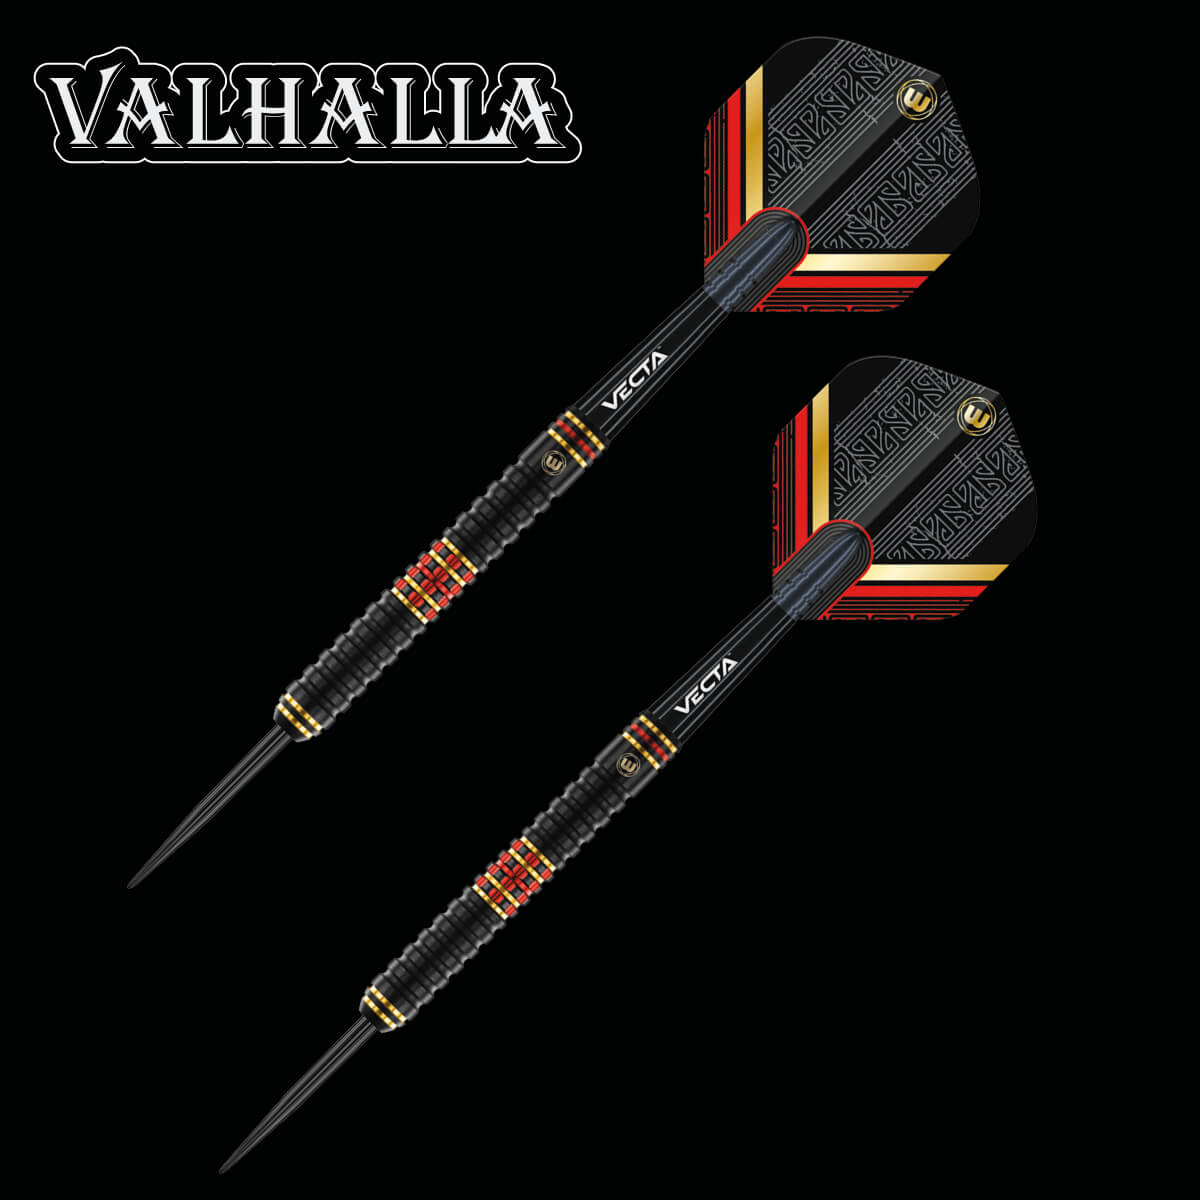 🎯 ⚔️ |  Winmau Valhalla

Want to grab yourself a set of the Winmau Valhallas we saw tonight? A captivating combination of Onyx PVD, red-gold detailing with dual-core tungsten technology 🌩

Available in 22g, 24g & 26g 🧐

Get them below ⬇️

reddragondarts.com/products/valha…